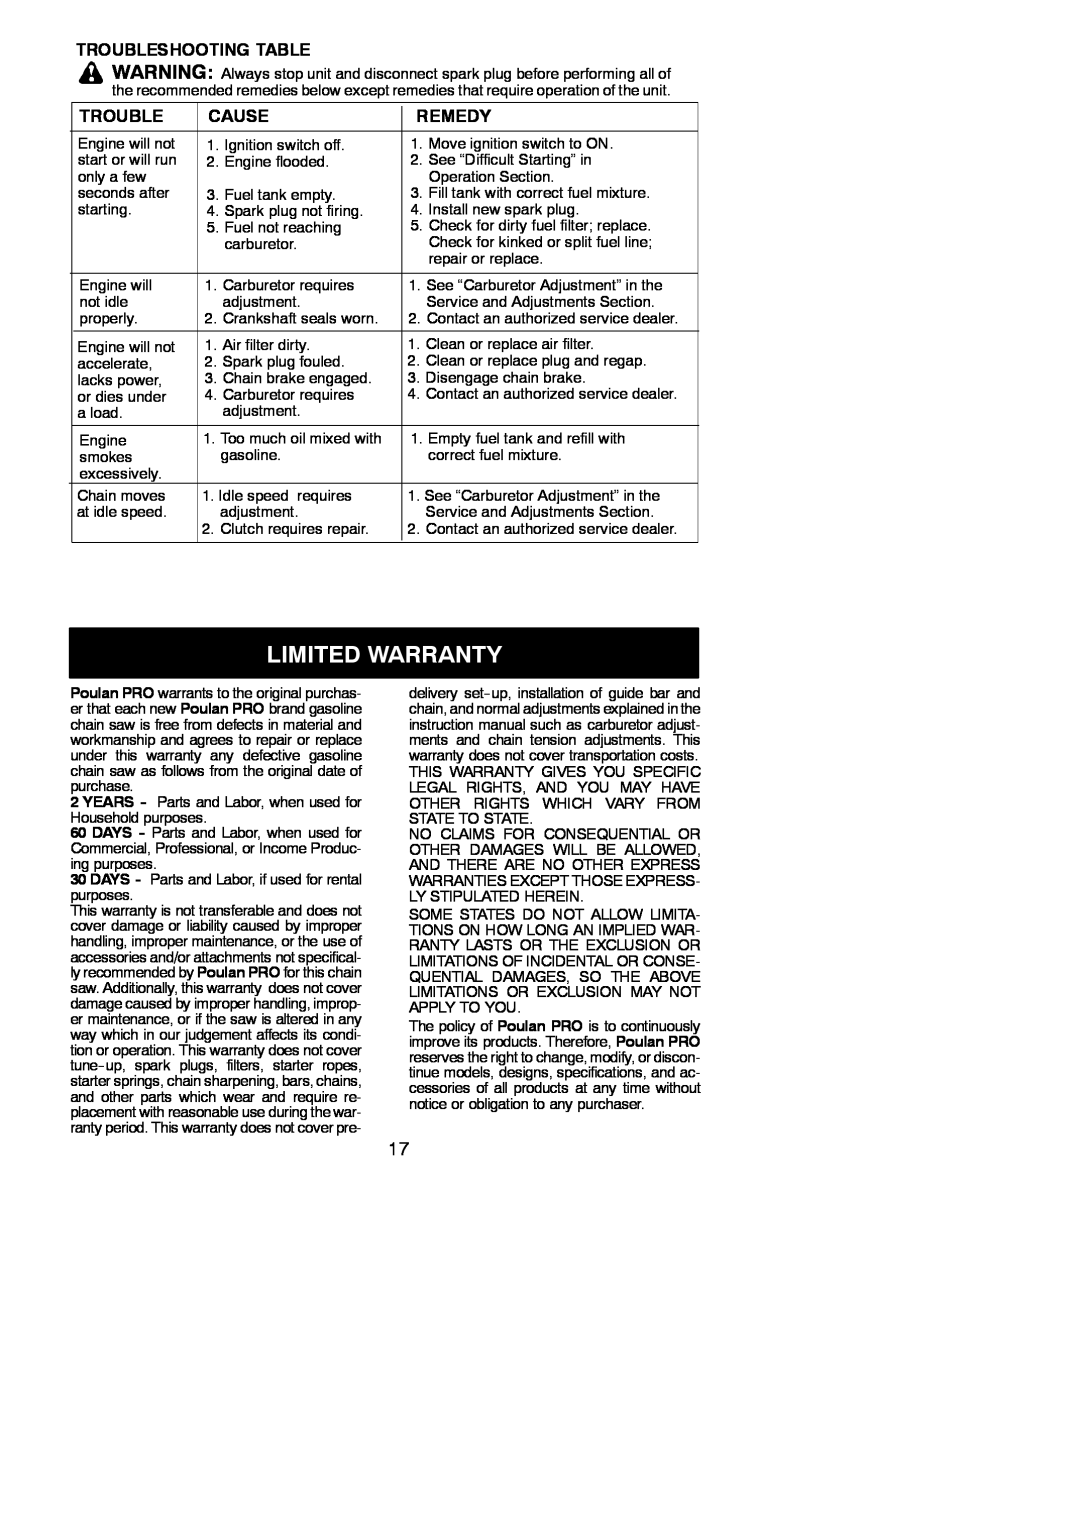 Poulan 545123817 instruction manual Limited Warranty, Troubleshooting Table, Cause, Remedy 